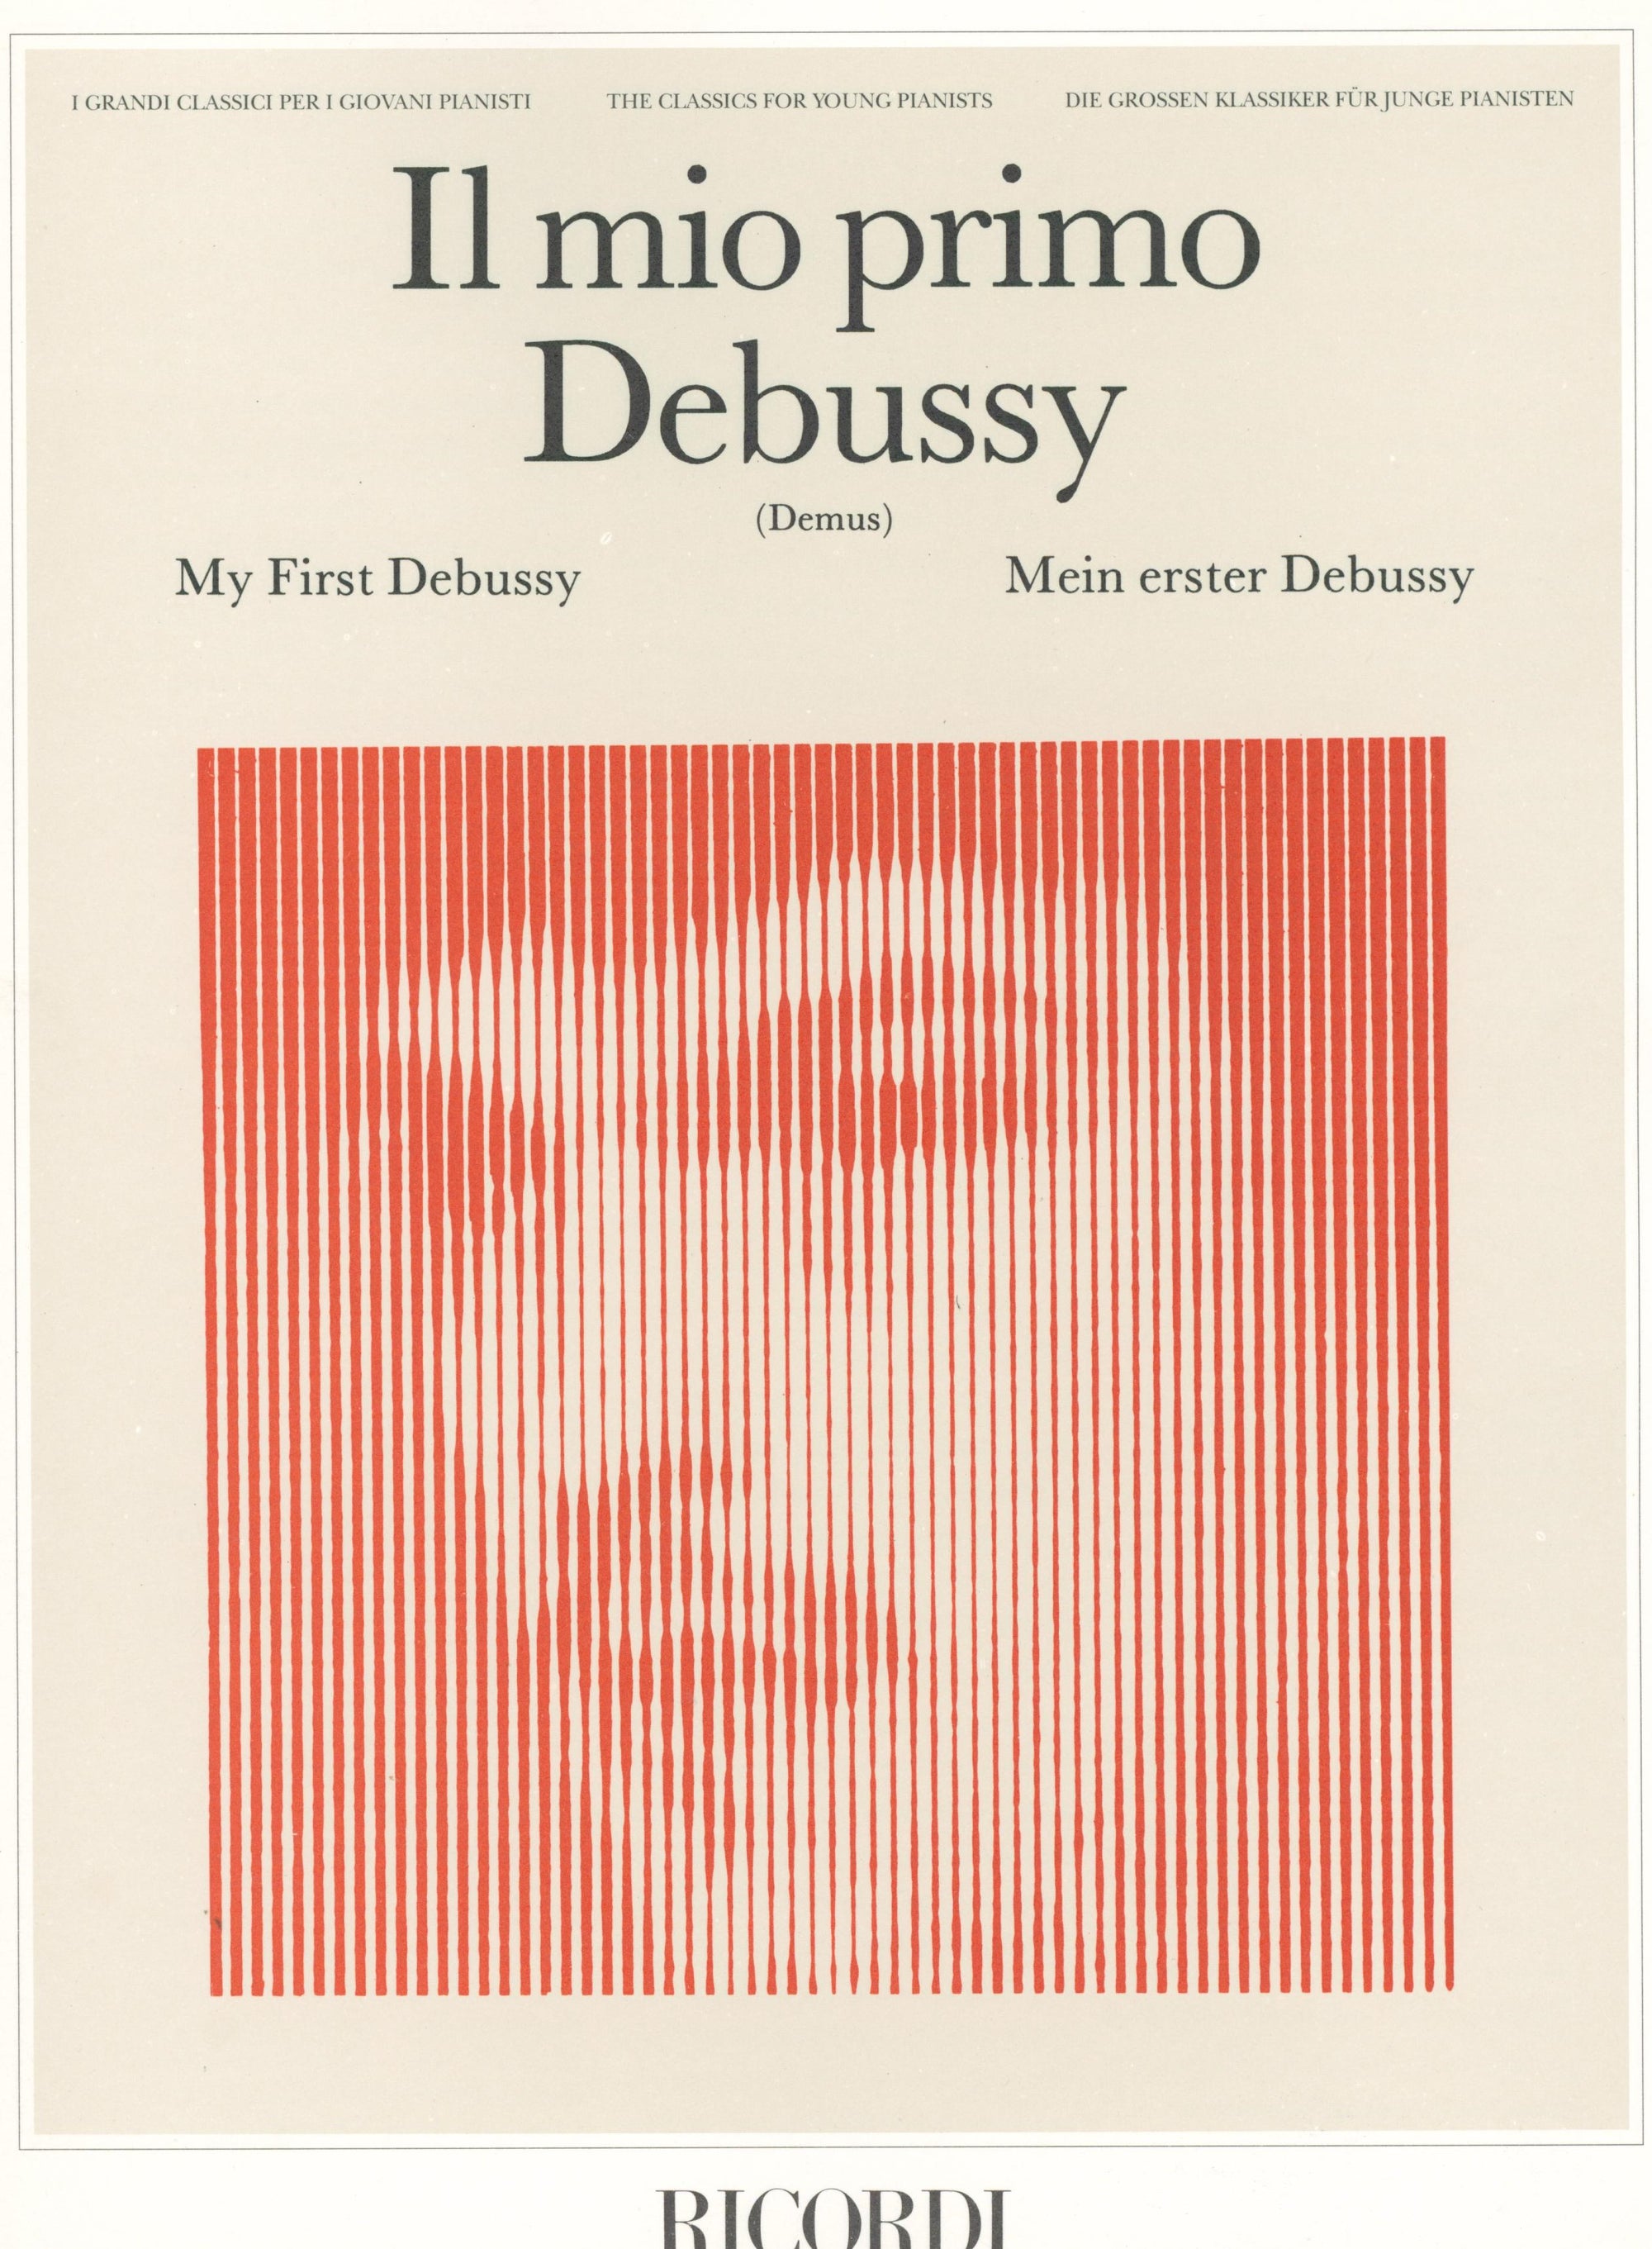 My First Debussy